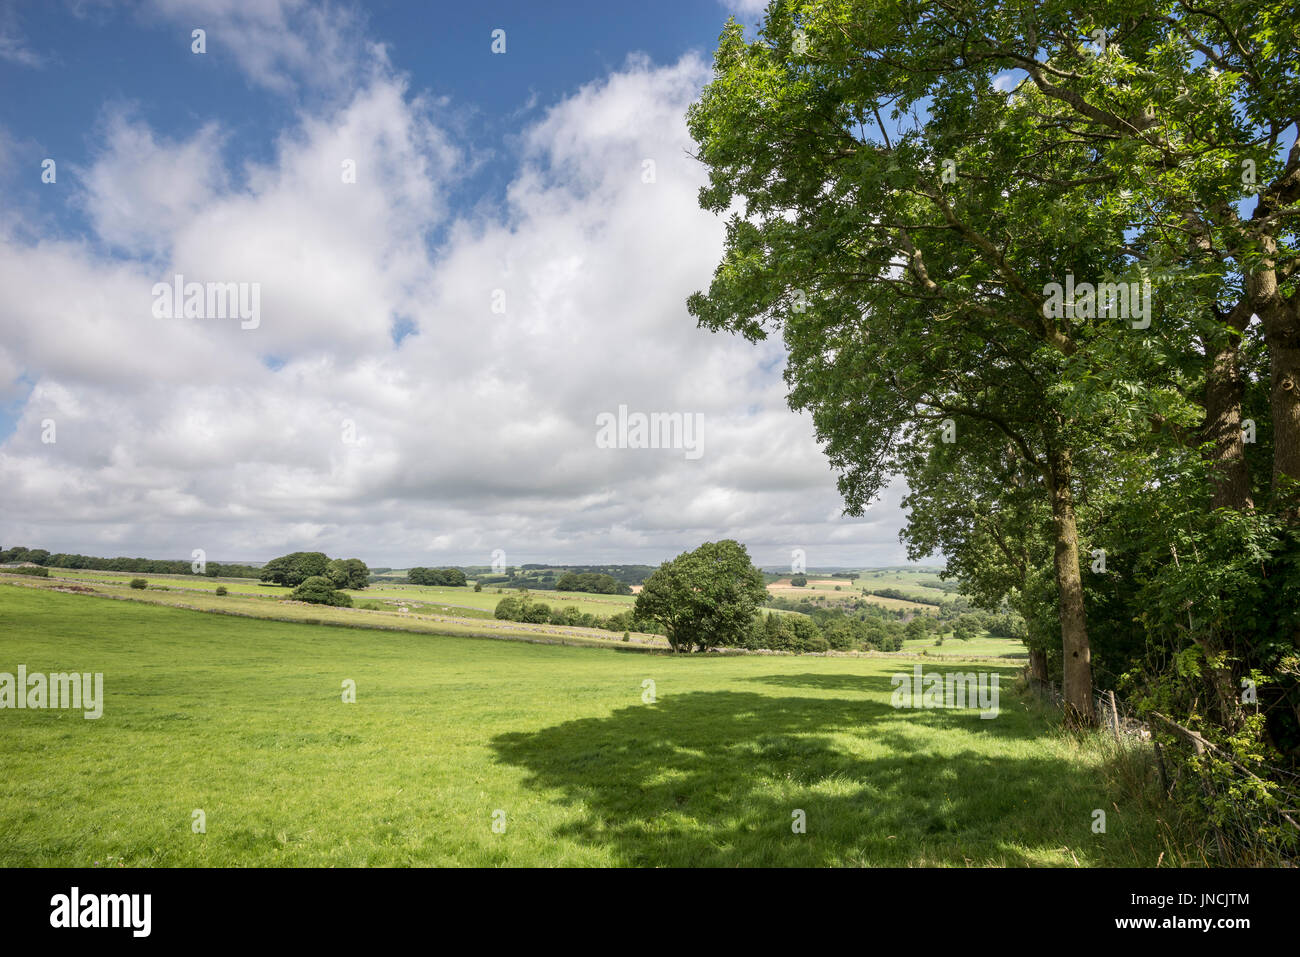 Summer day in the English countryside Stock Photo